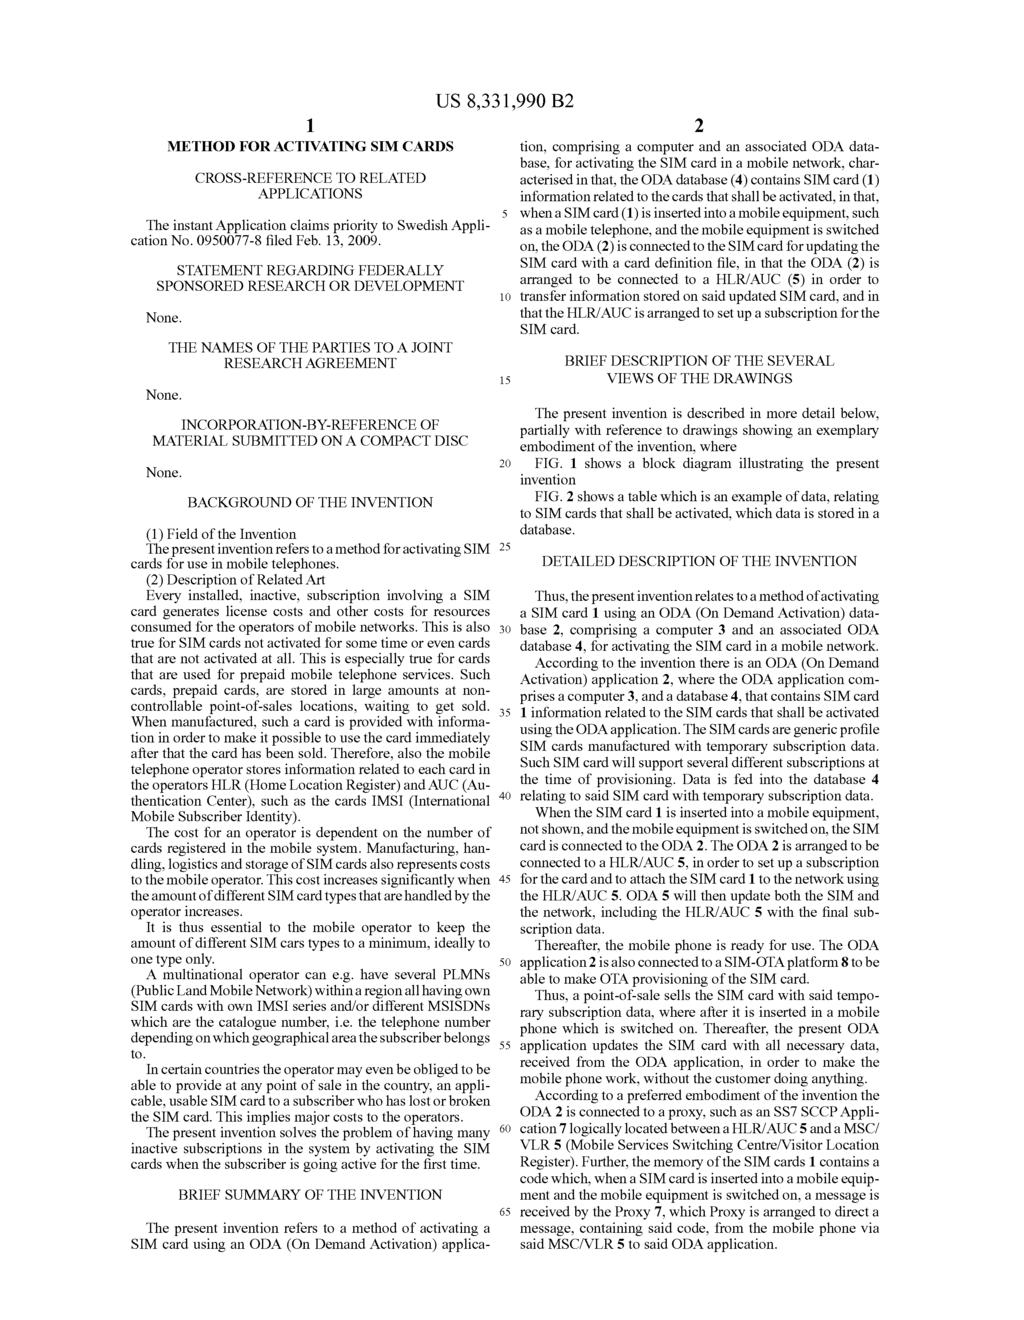 1. METHOD FOR ACTIVATING SM CARDS CROSS-REFERENCE TO RELATED APPLICATIONS The instant Application claims priority to Swedish Appli cation No. 0950077-8 filed Feb. 13, 2009.